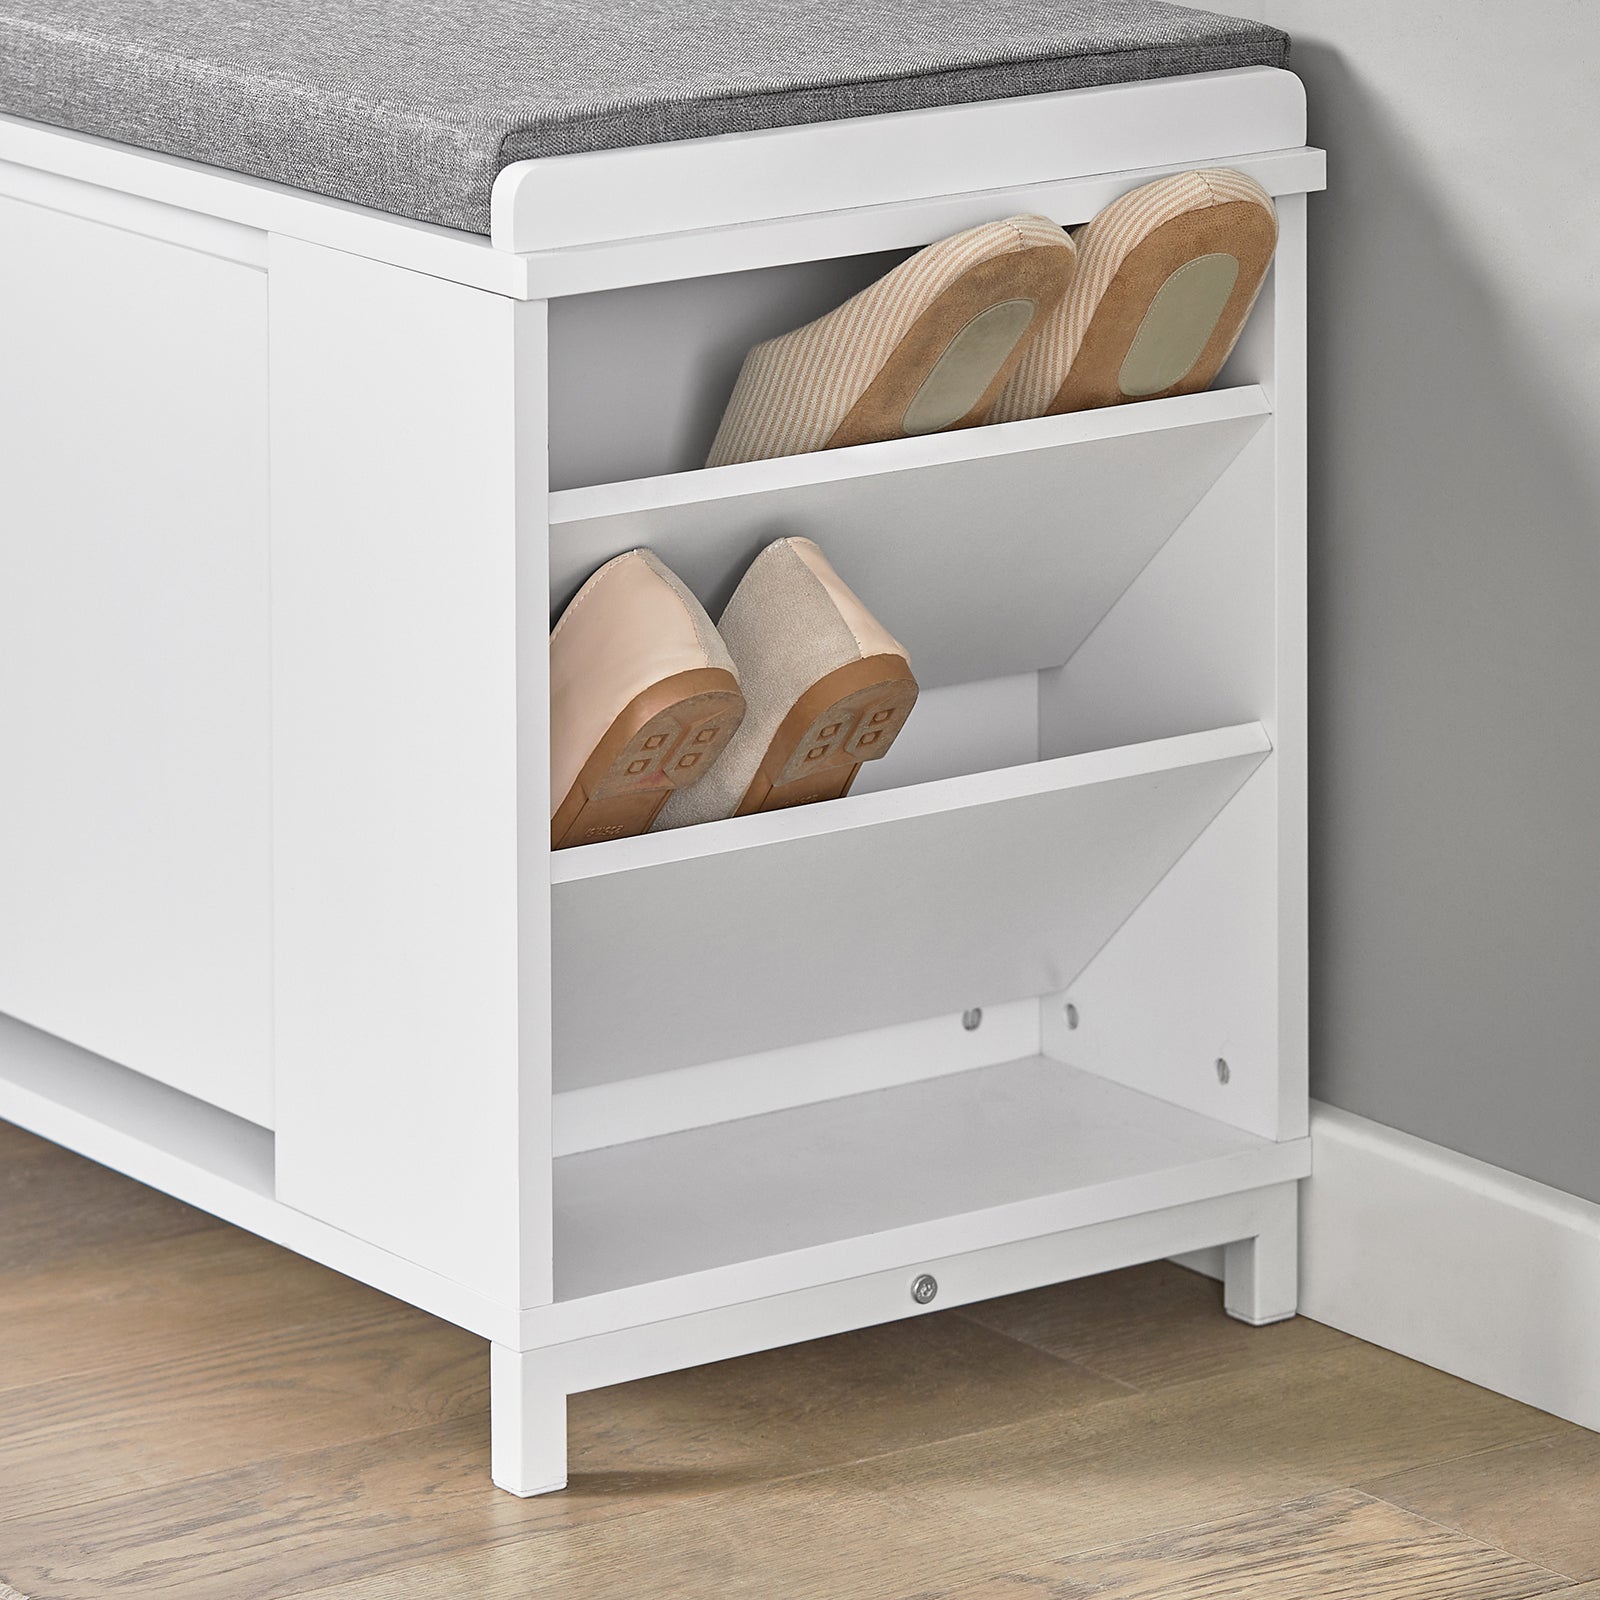 SoBuy FSR105-W, White Flip-Drawer Shoe Bench, Storage Bench with Side Shelf and Removable Seat Cushion